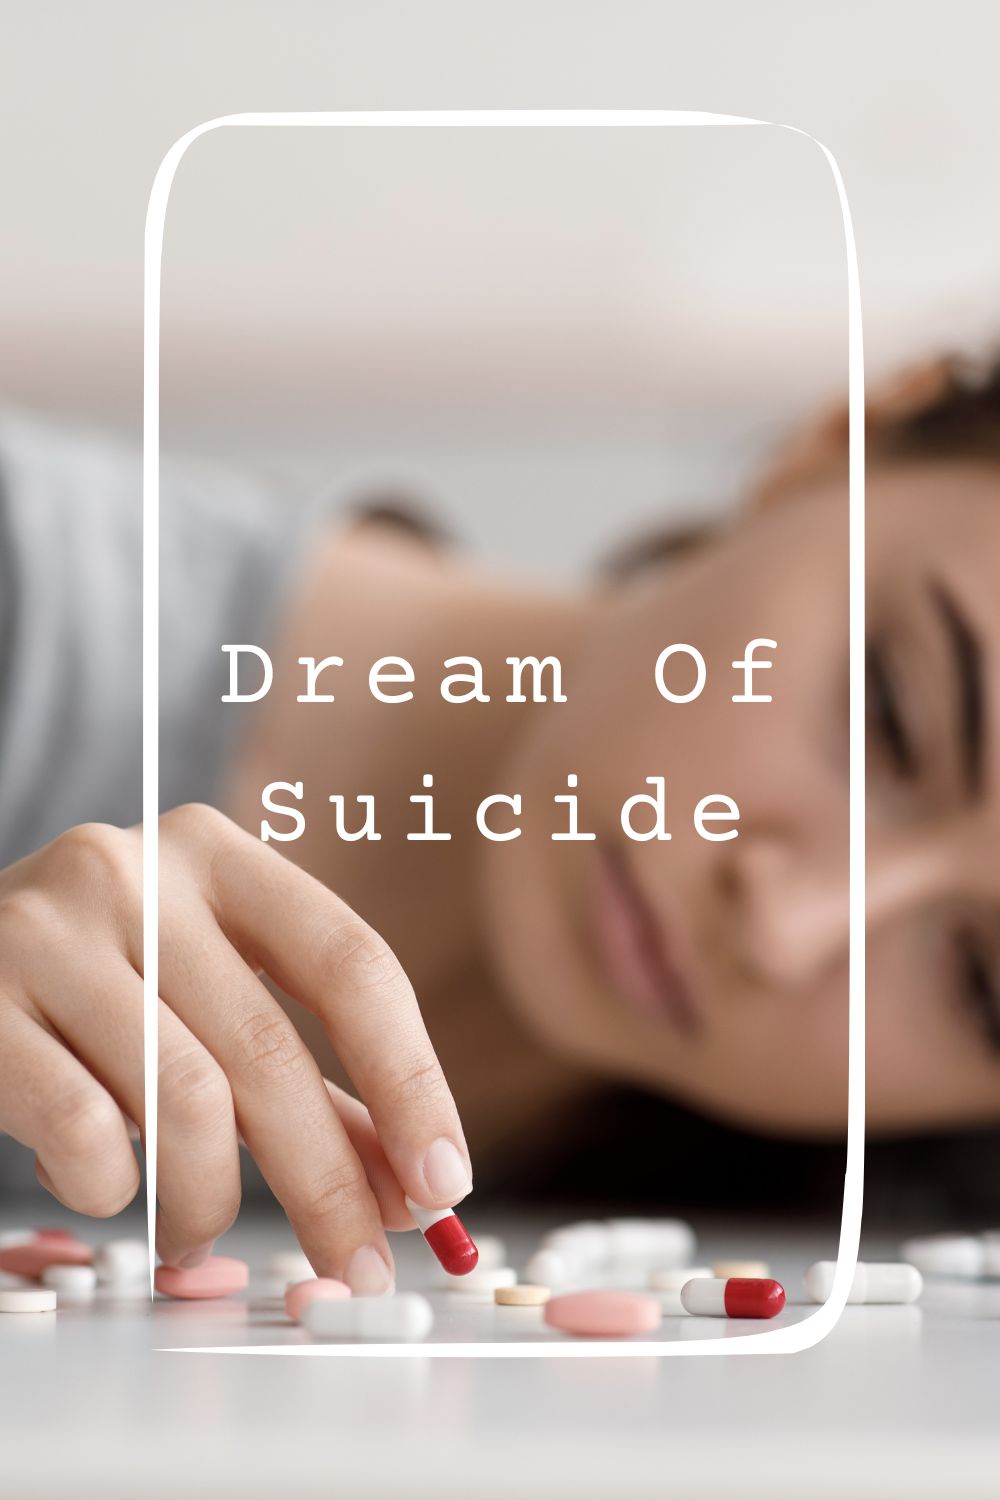 Dream Of Suicide Meanings 1